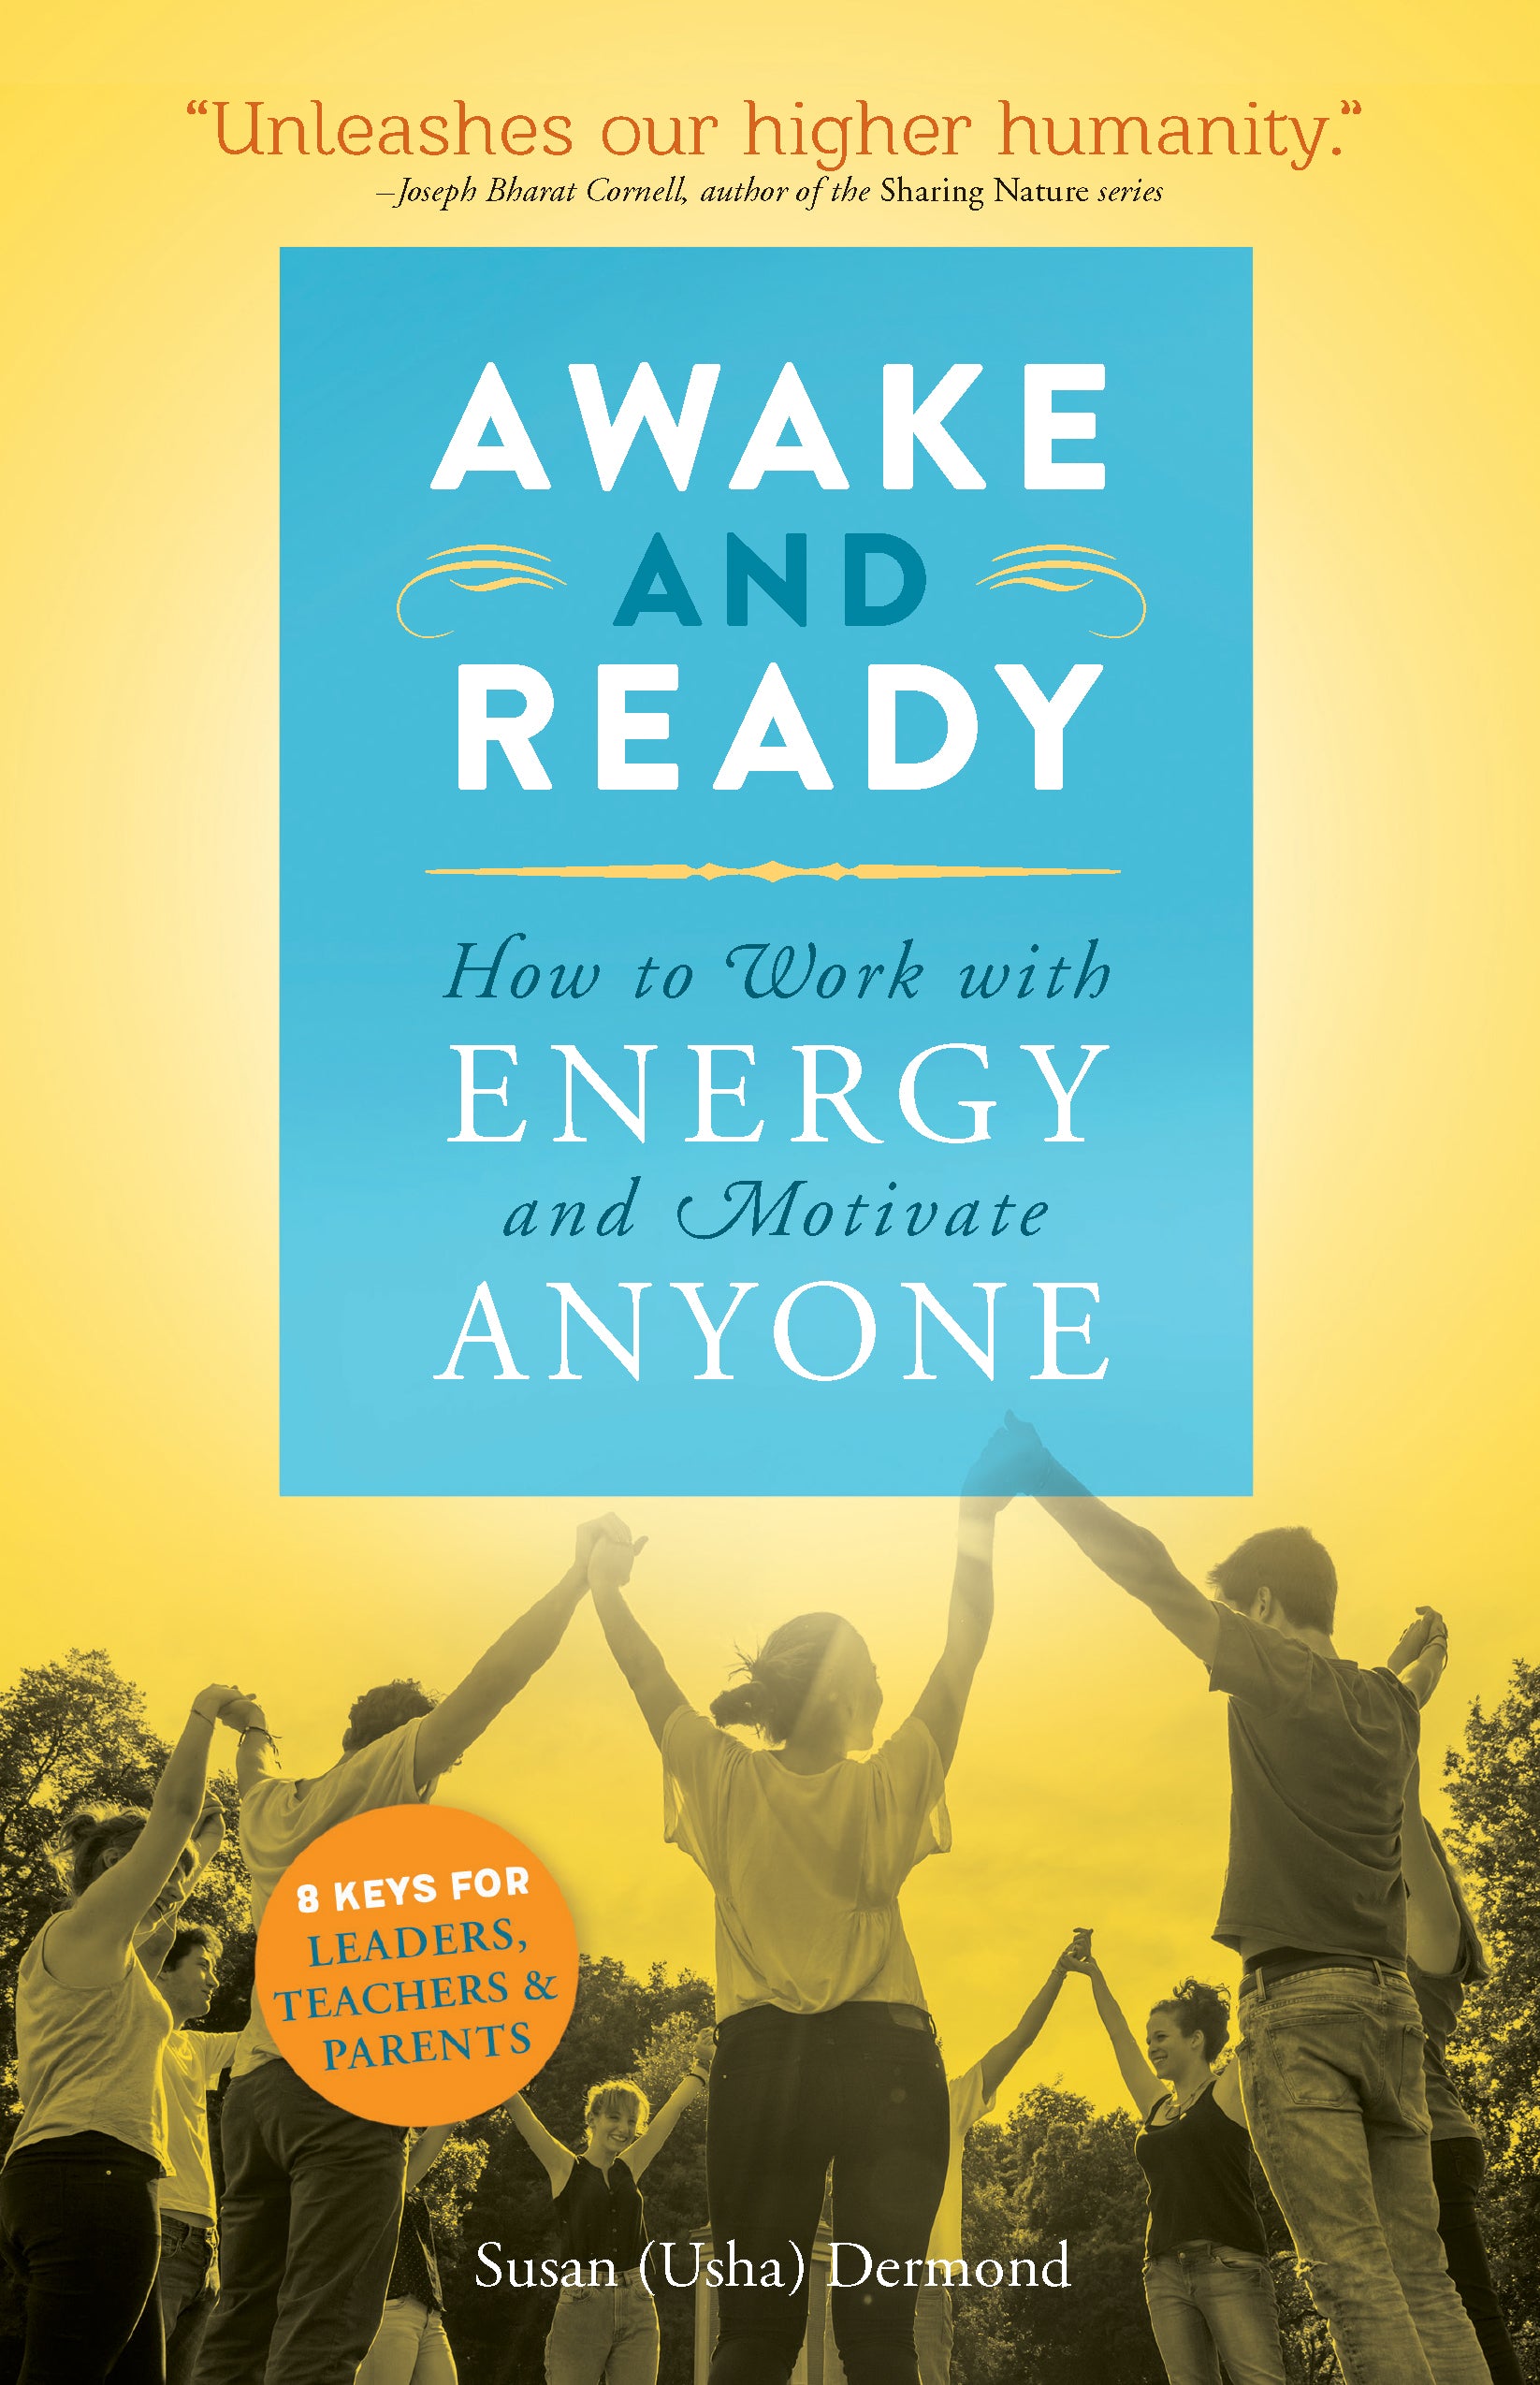 Awake and Ready: How to Work with Energy and Motivate Anyone